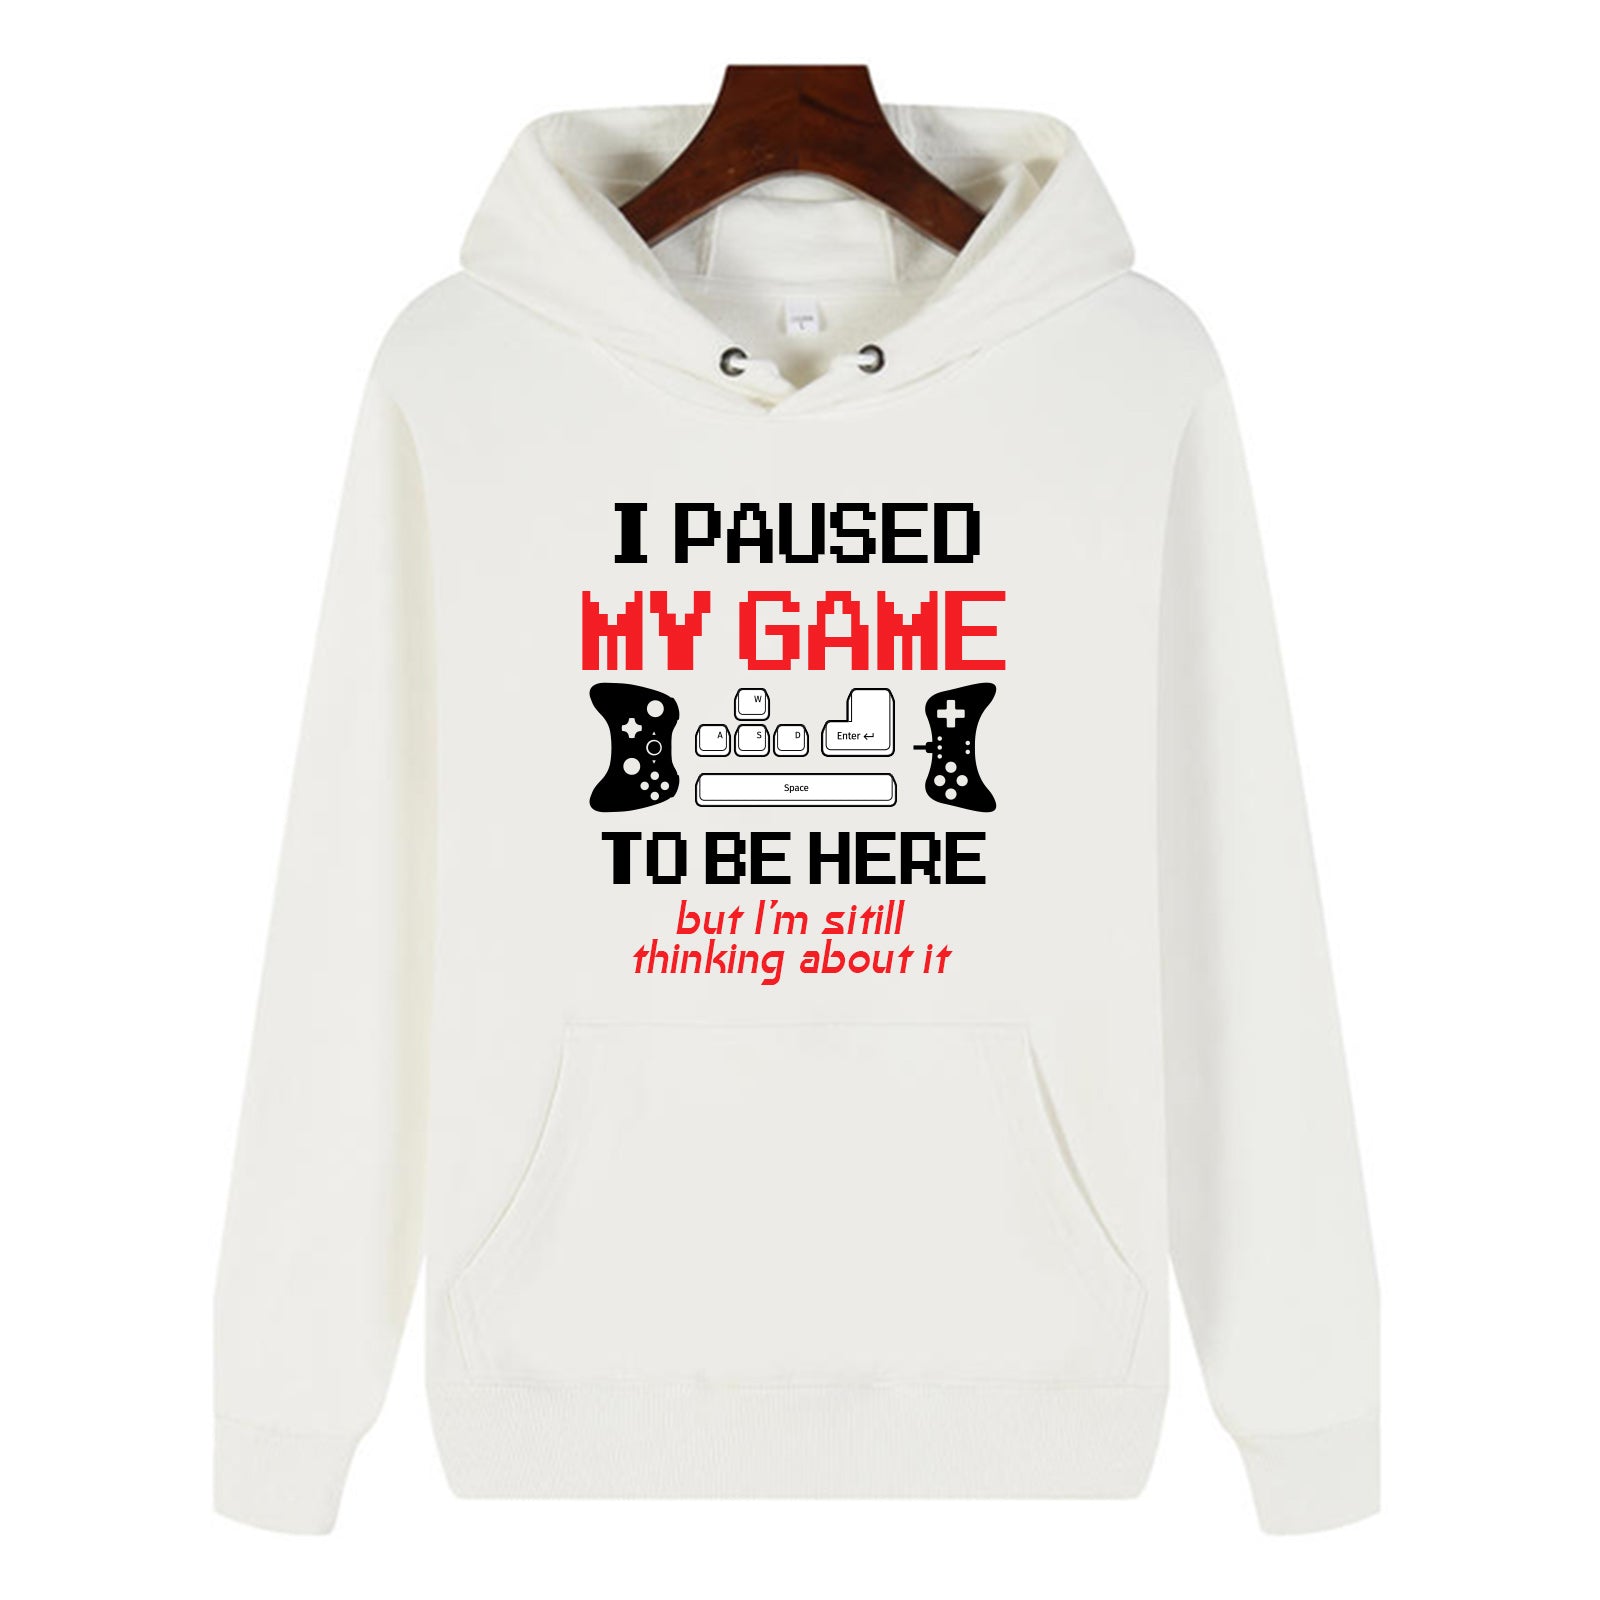 Oversized Sports Hoodie I PAUSED MY GAME TO BE HERE Hooded Sweatshirt